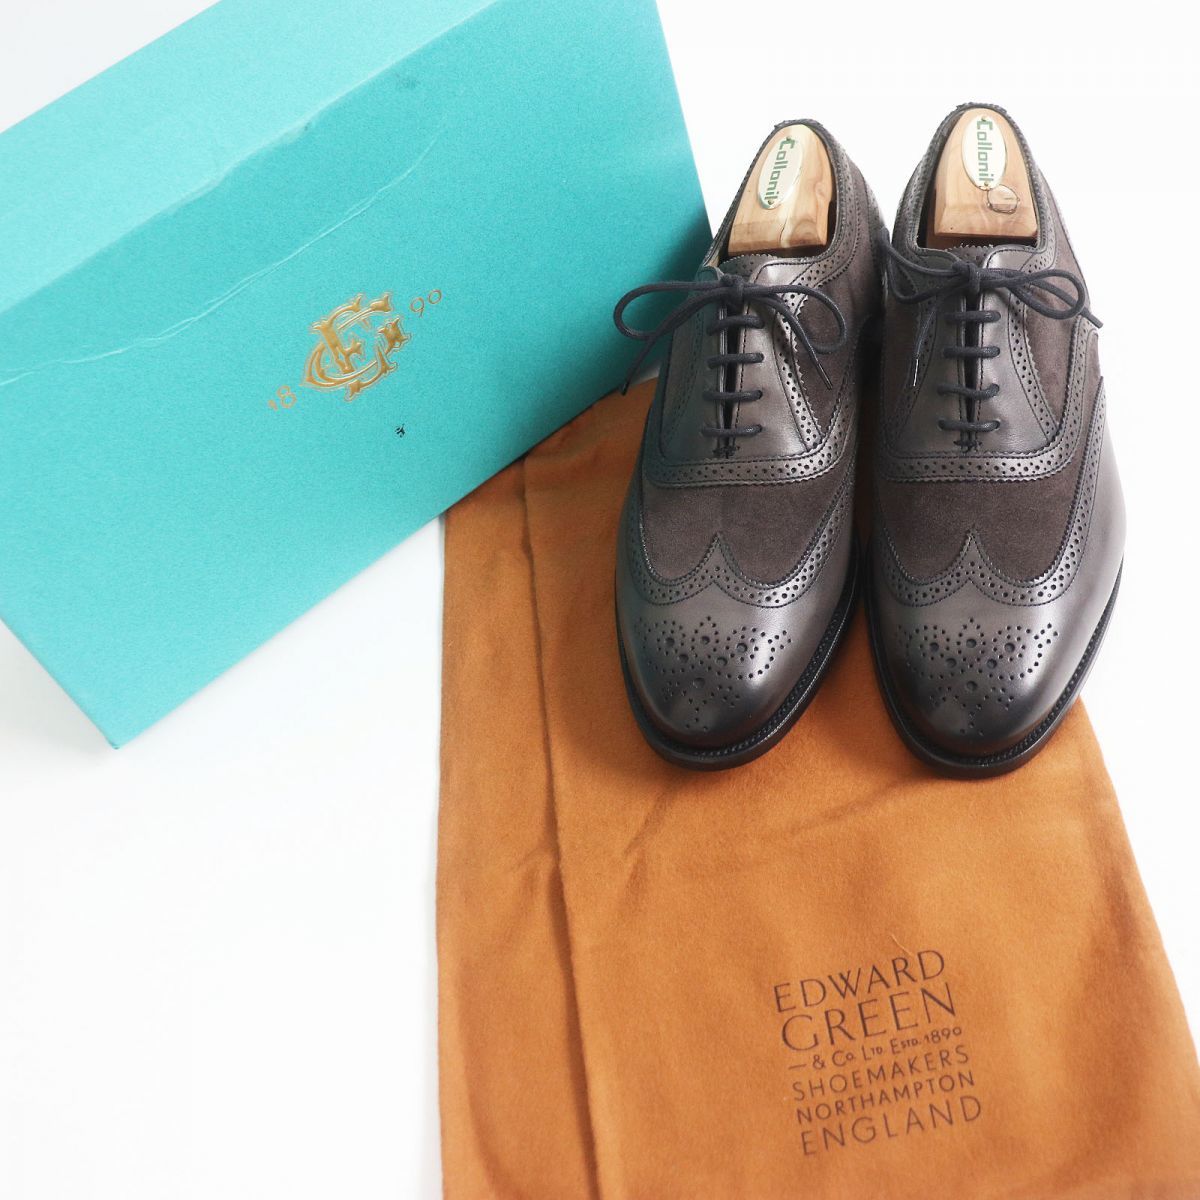  unused goods * Edward Green MALVERN III 202E full blow Grace up suede leather dress shoes dark brown 6 box attaching 